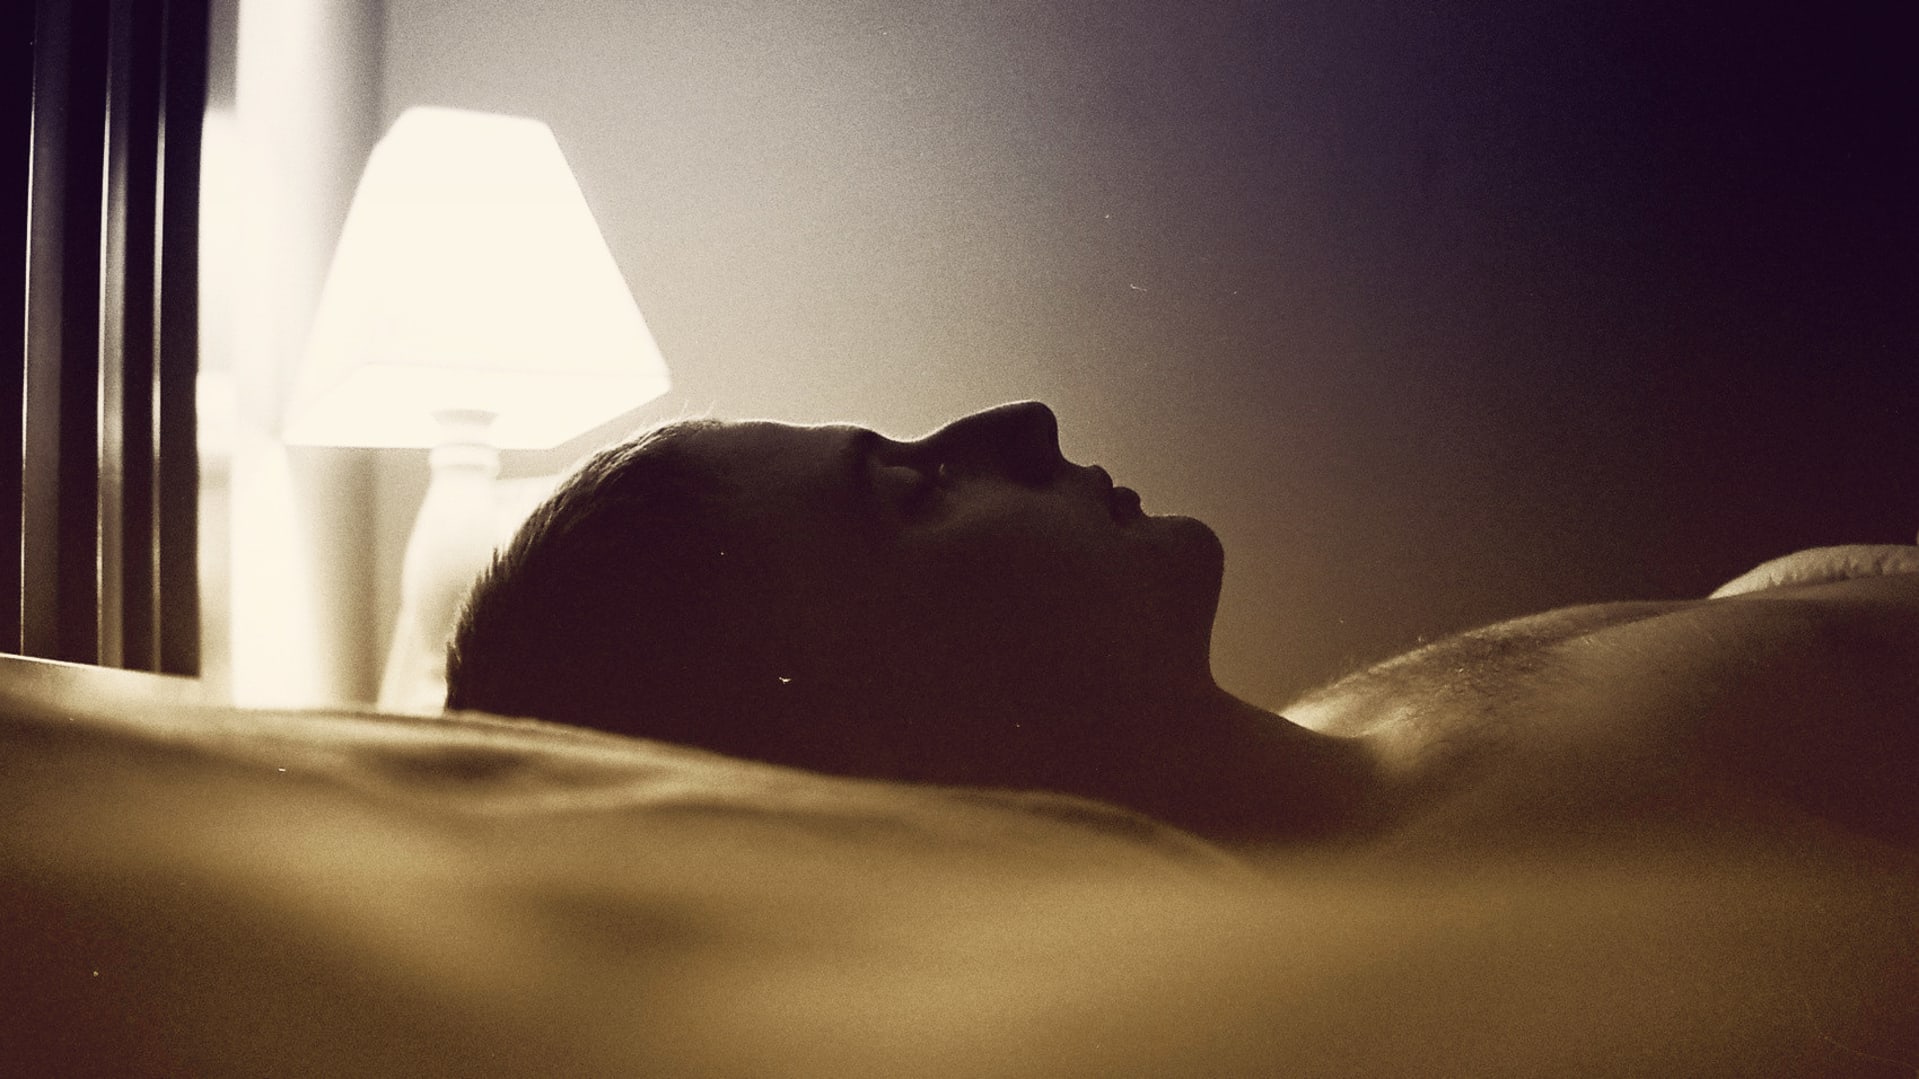 Can These Tools Help Us Live On Less Sleep? Doctors Say Dream On